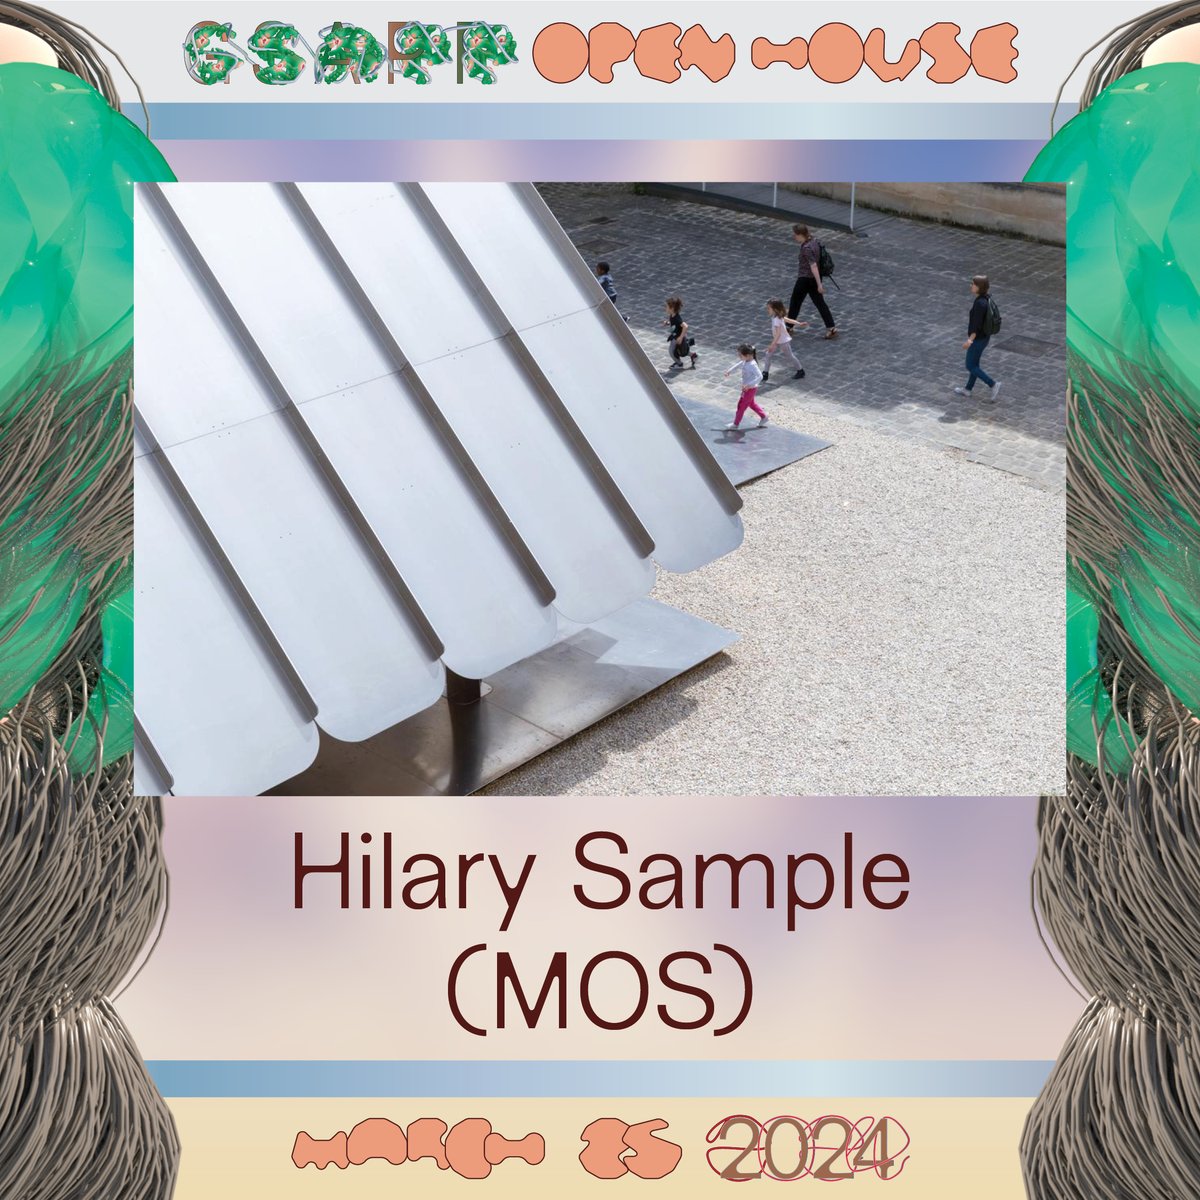 Tomorrow: Monday, March 25th, Hilary Sample (MOS) will take the stage at Wood Auditorium and deliver this year’s Spring Open House lecture, followed by a response from Dean Andrés Jaque. arch.columbia.edu/events/3363-hi…